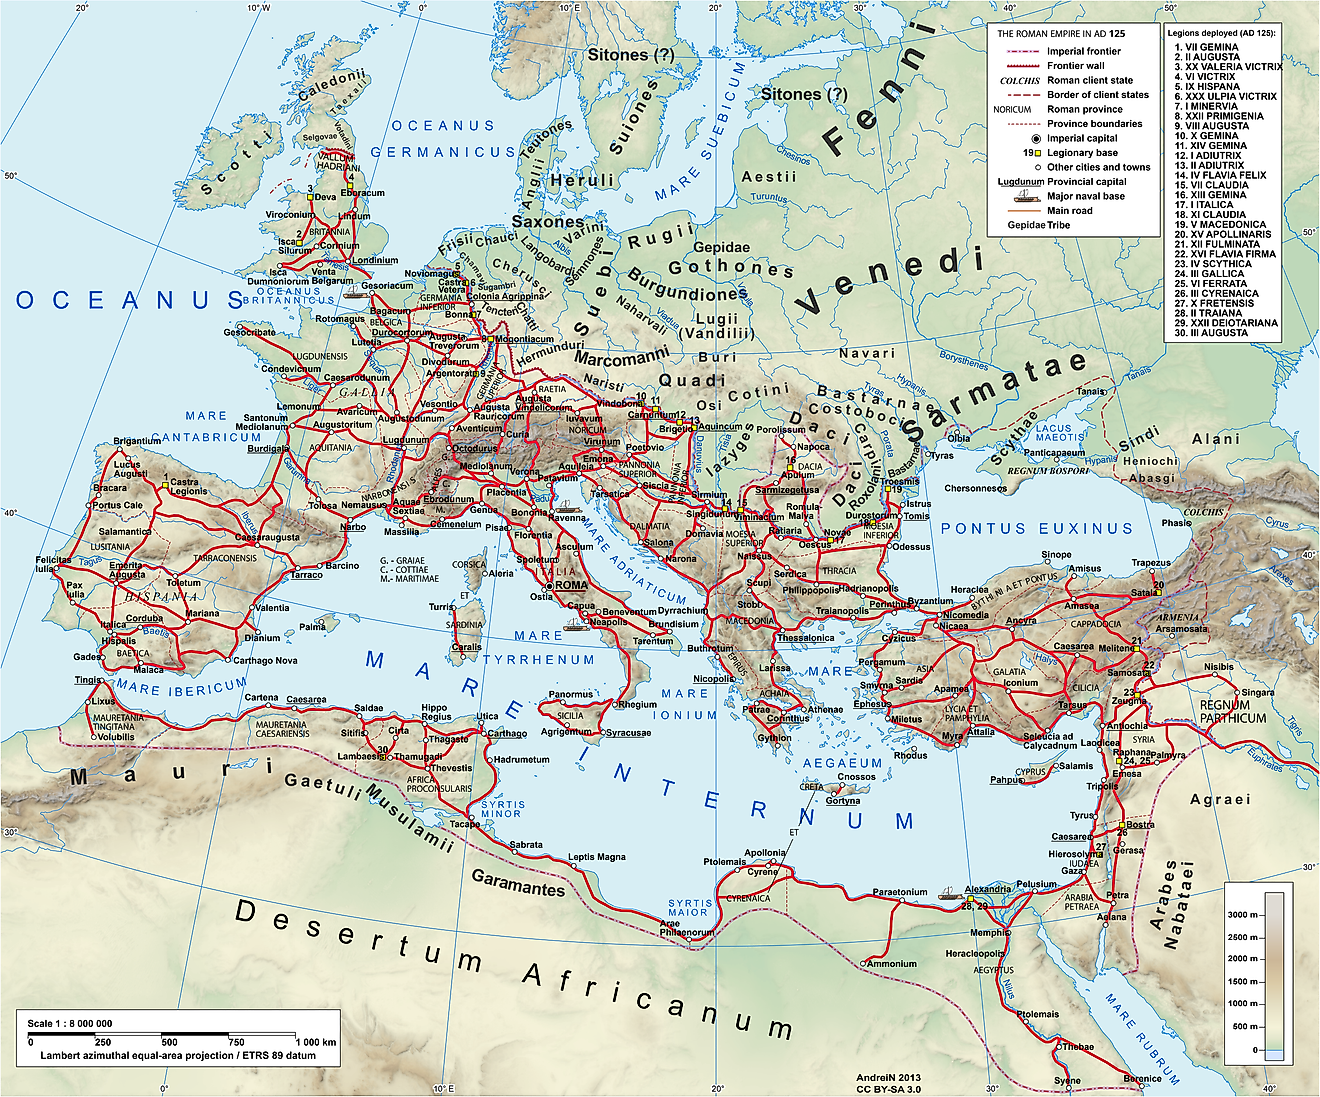 roads in ancient roman empire By DS28 - File:Roman Empire 125 general map.SVG, CC BY-SA 4.0, https://commons.wikimedia.org/w/index.php?curid=68002775